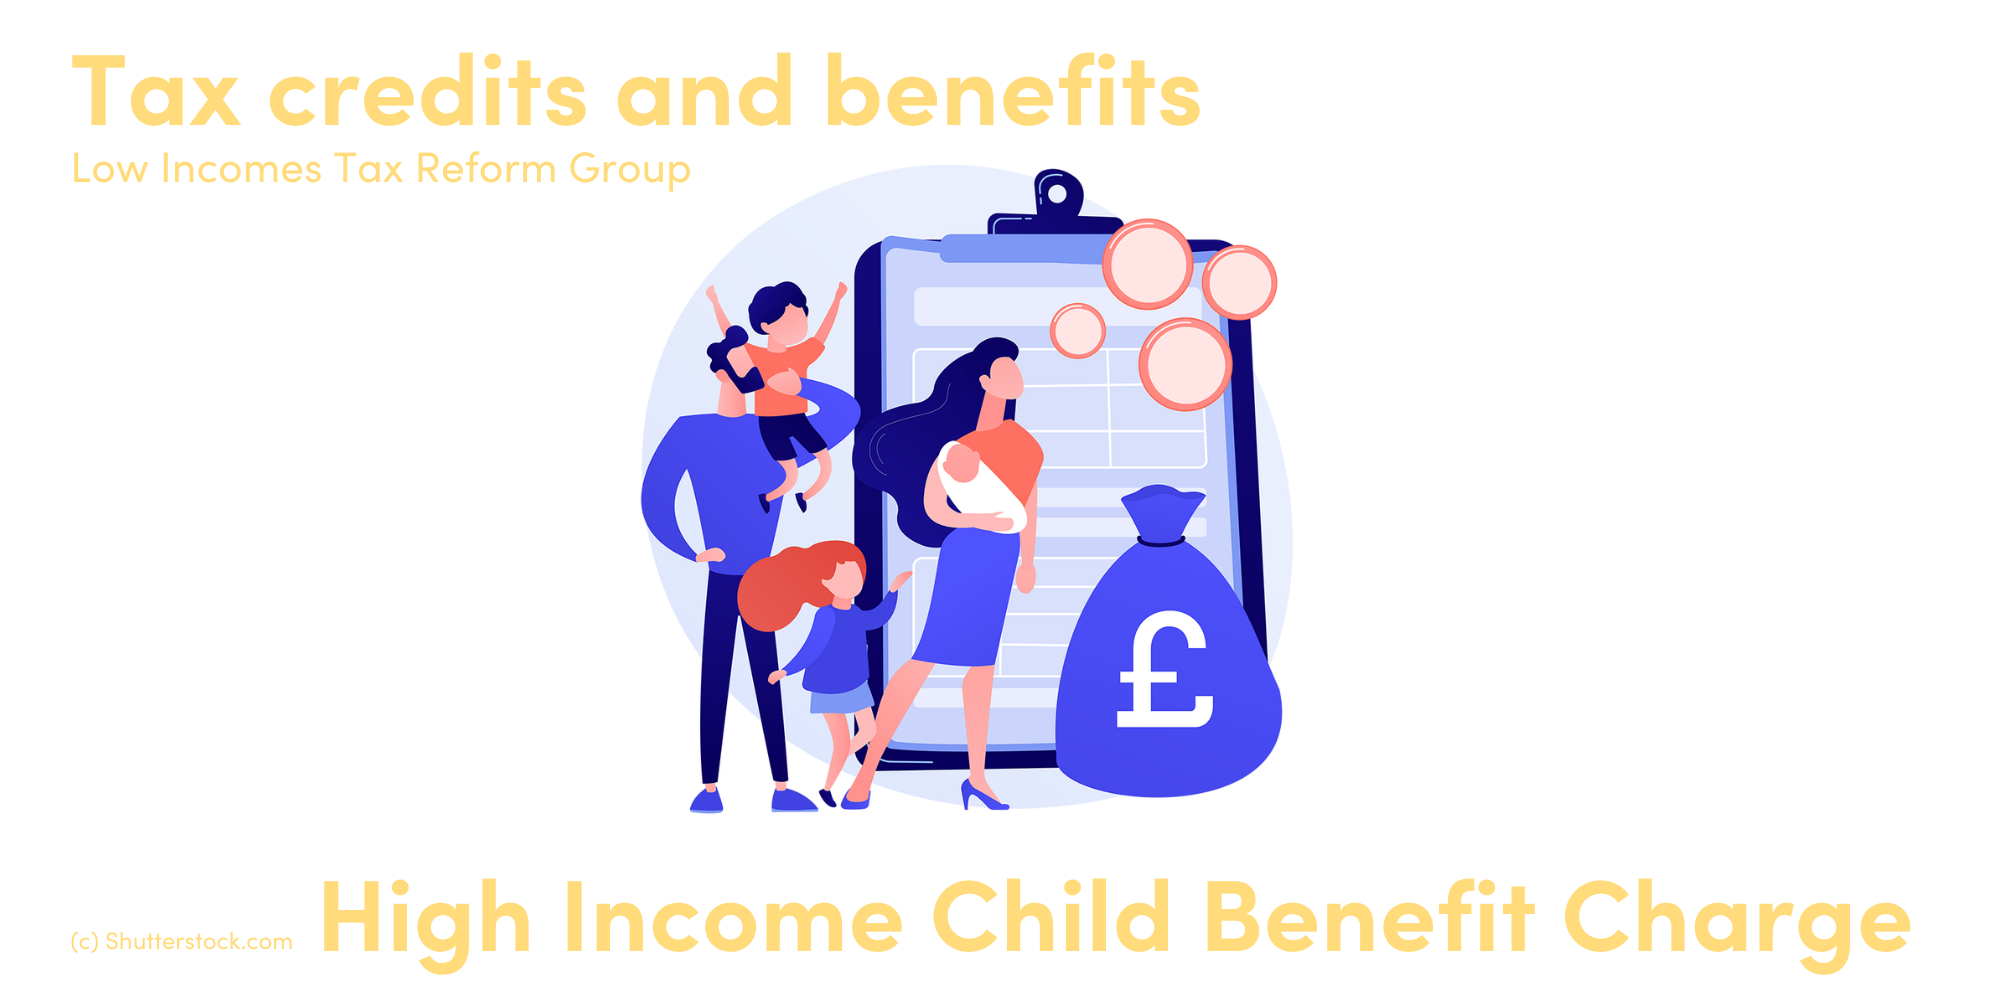 The high income child benefit charge Low Incomes Tax Group